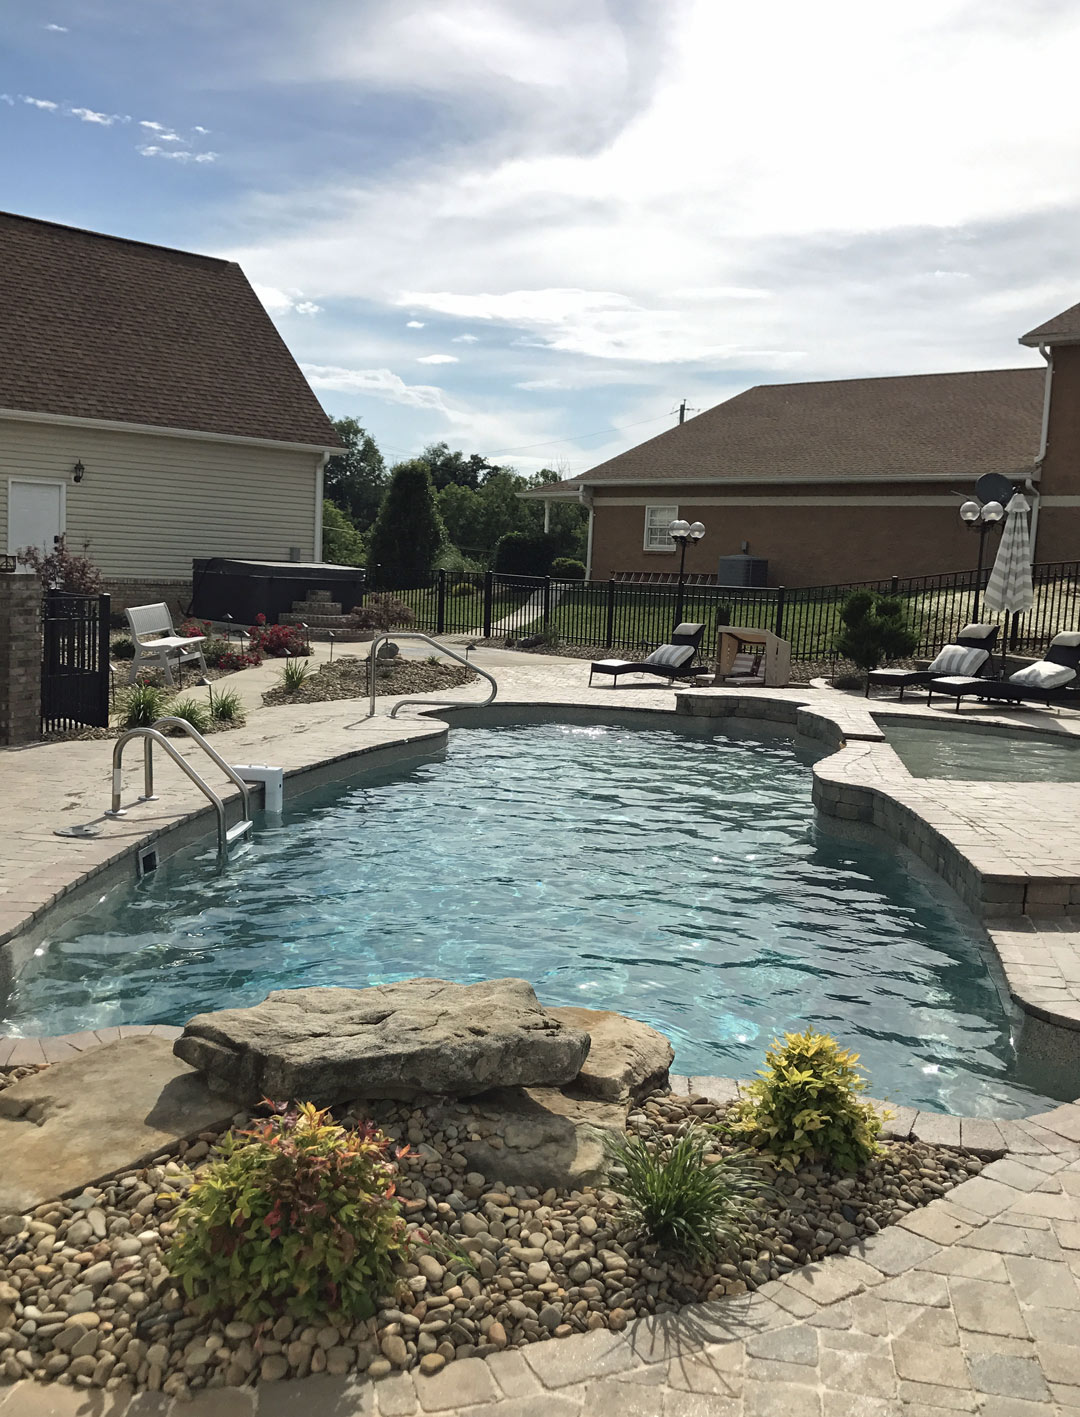 Extensive Hardscaping Surrounds A Multi-Level Swimming Pool in Hamblen County Tennessee